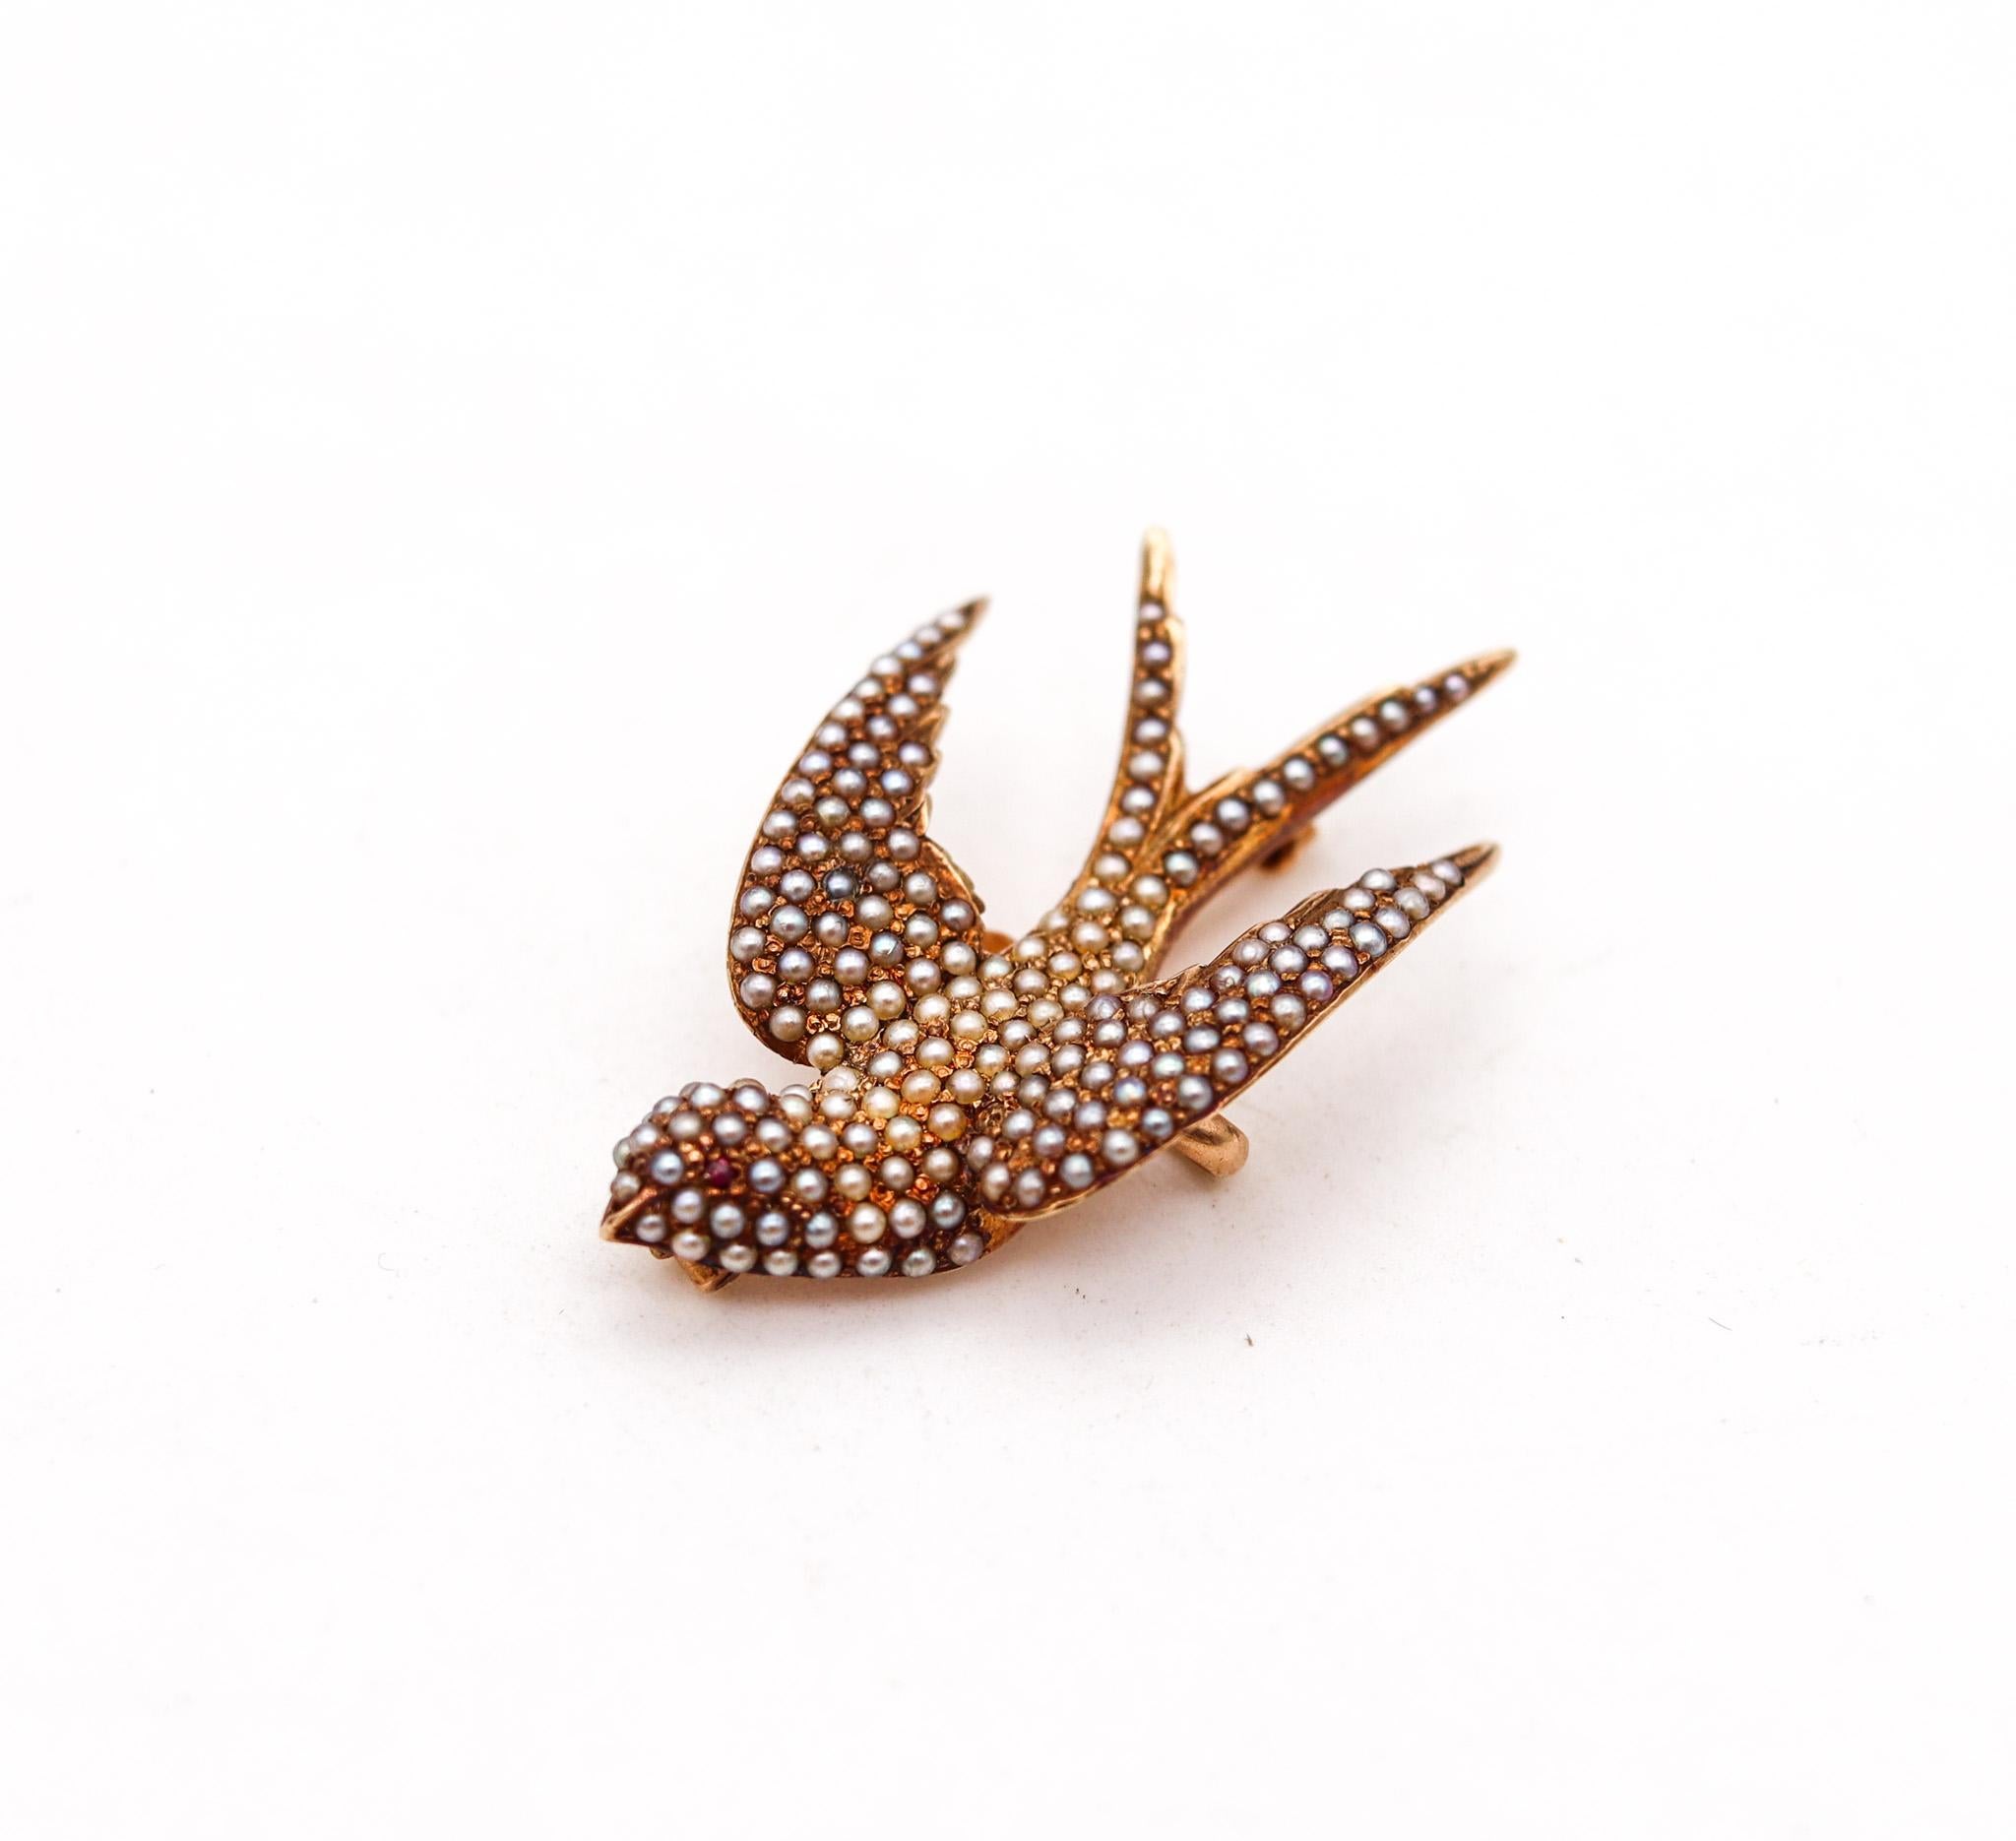 Flying dove brooch with pearls.

Very rare piece, created in England during the high Victorian era (1837-1901), back in the 1880. This fabulous brooch has been carefully crafted in the shape of a flying dove in solid yellow gold of 14 karats with